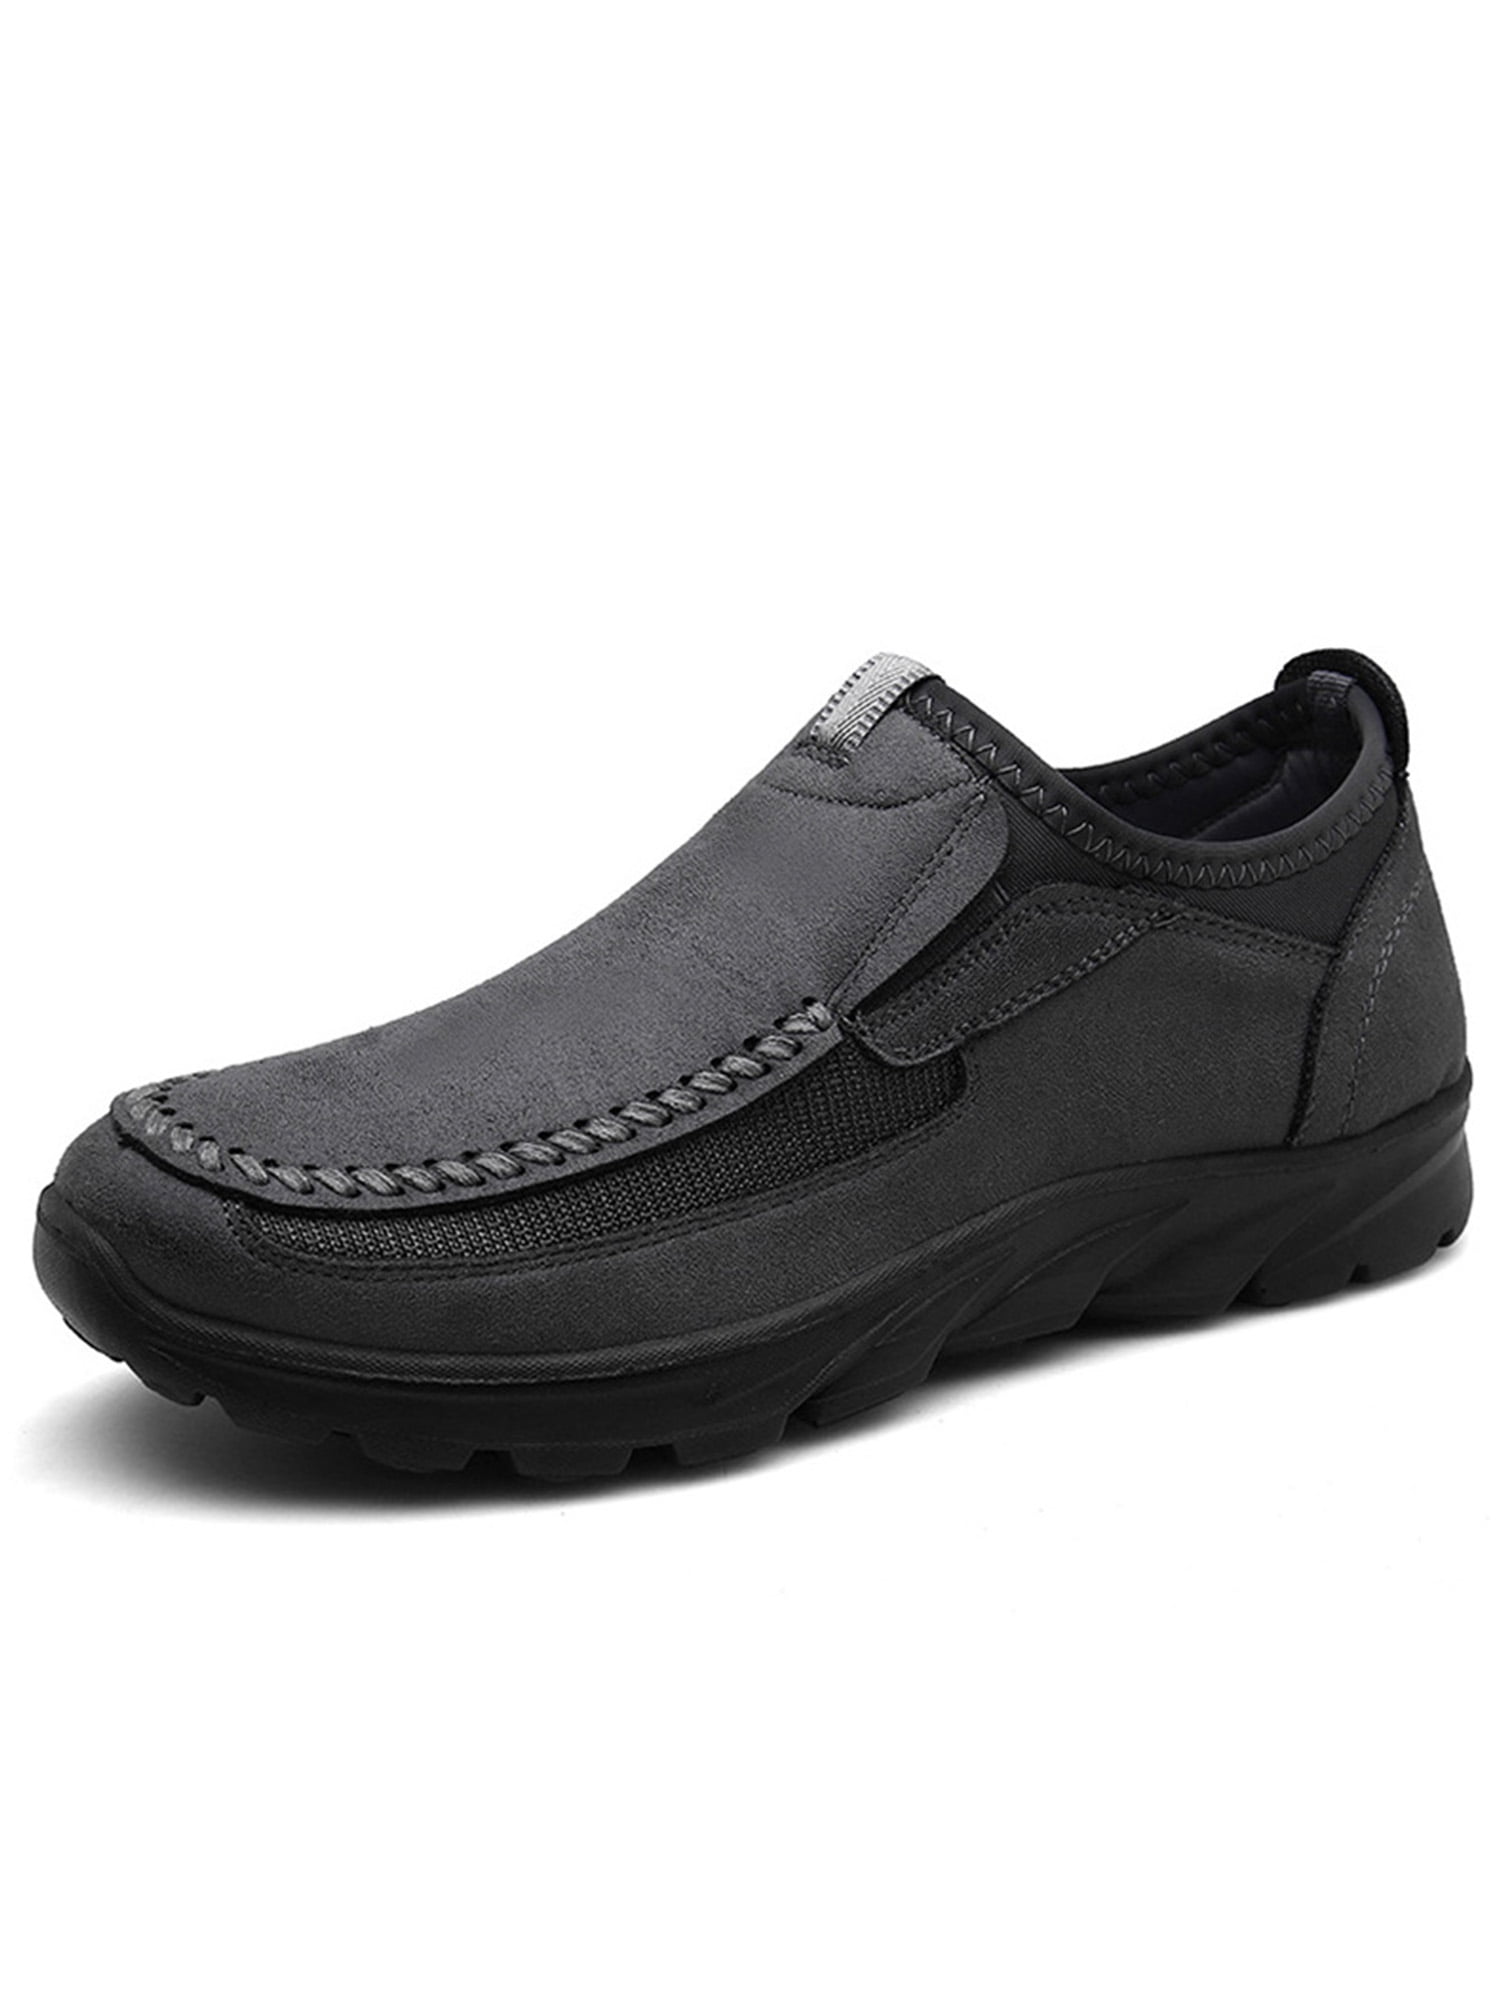 Mens  Slip On Synthetic Leather Black Slip On Casual Formal Shoes New Sizes 